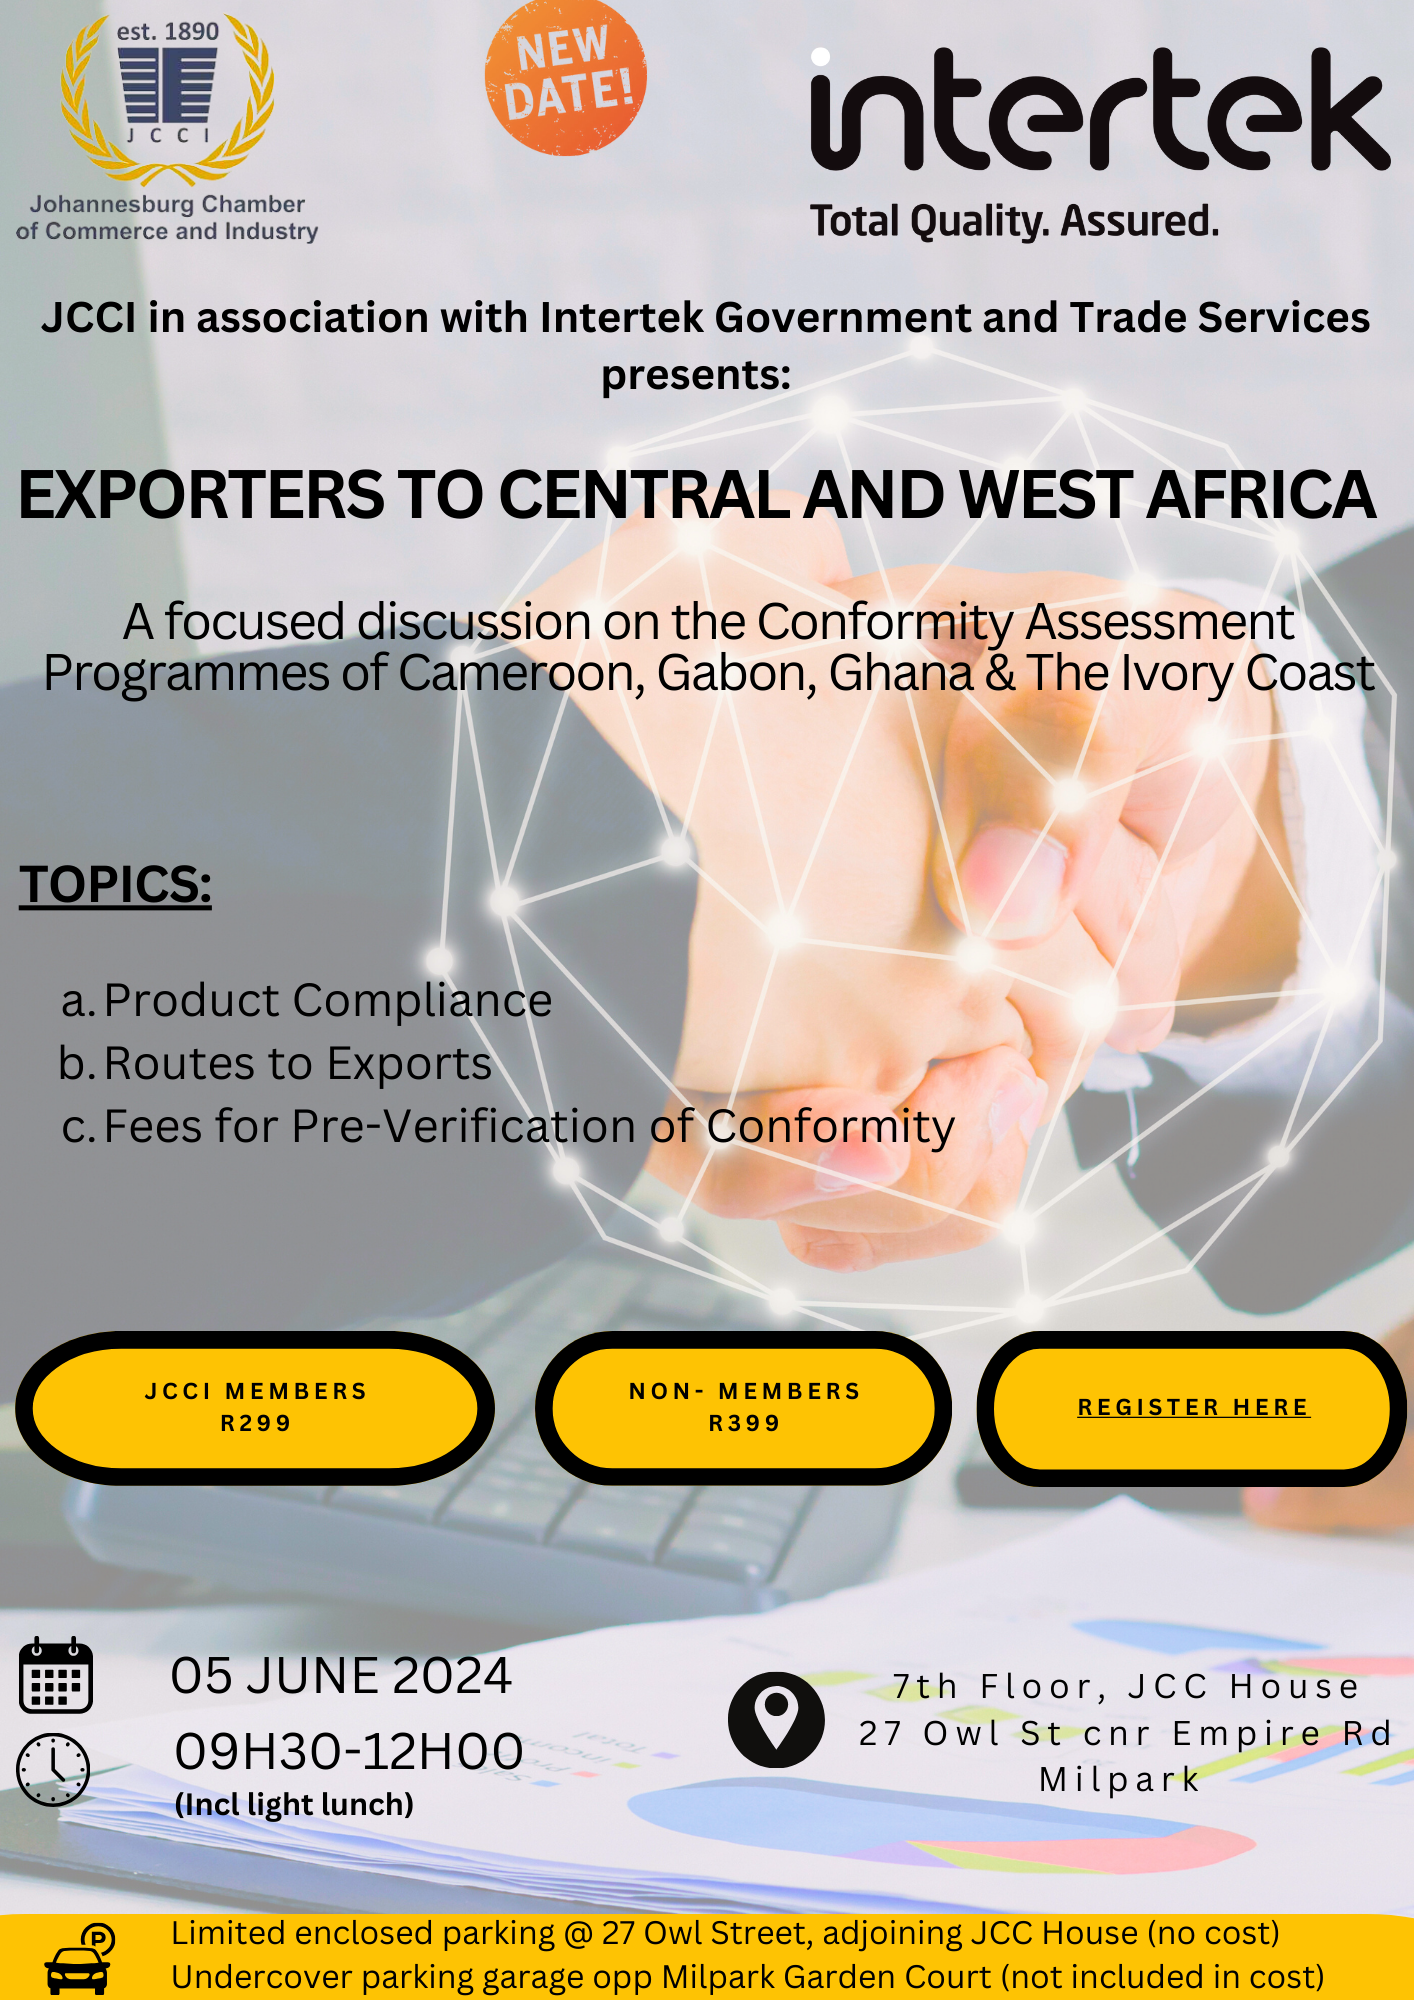 EXPORTS TO CENTRAL & WEST AFRICA - 05 JUNE 2024